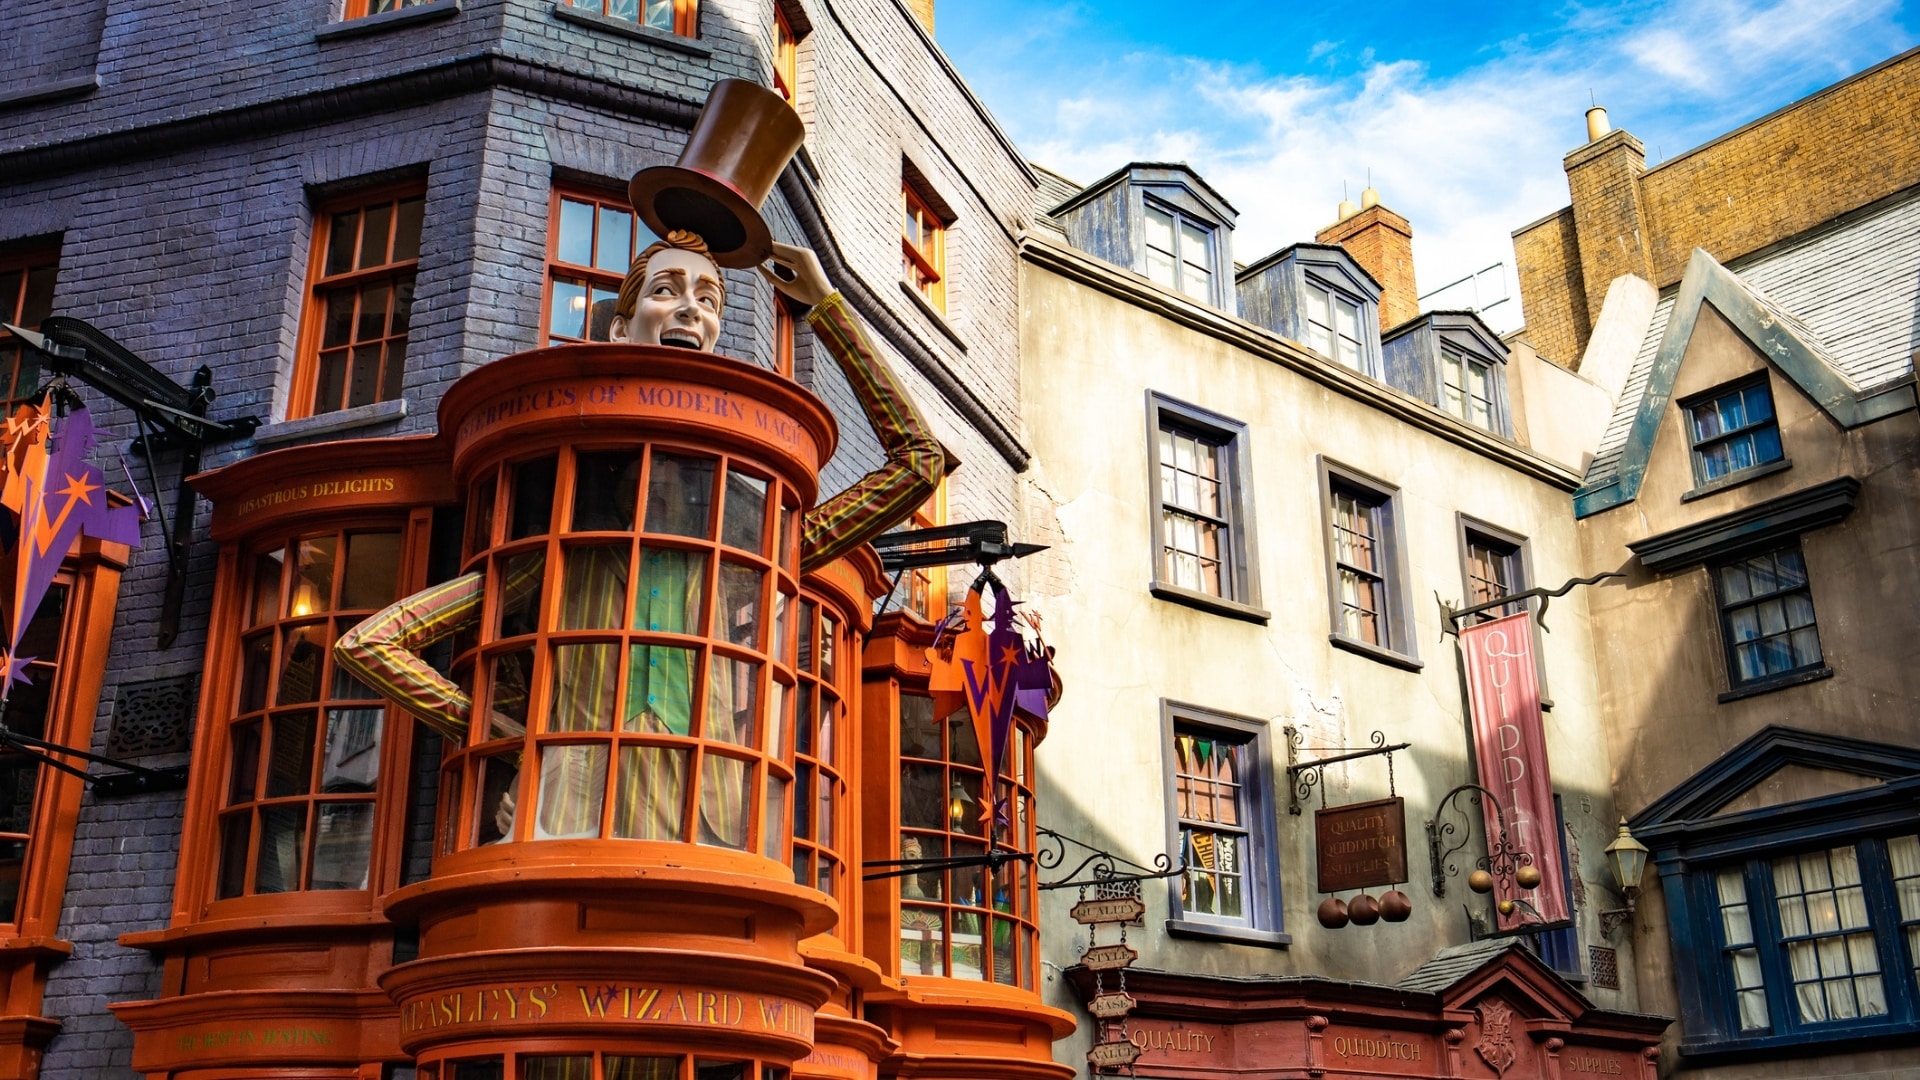 Diagon Alley Stores - The Wizarding World of Harry Potter